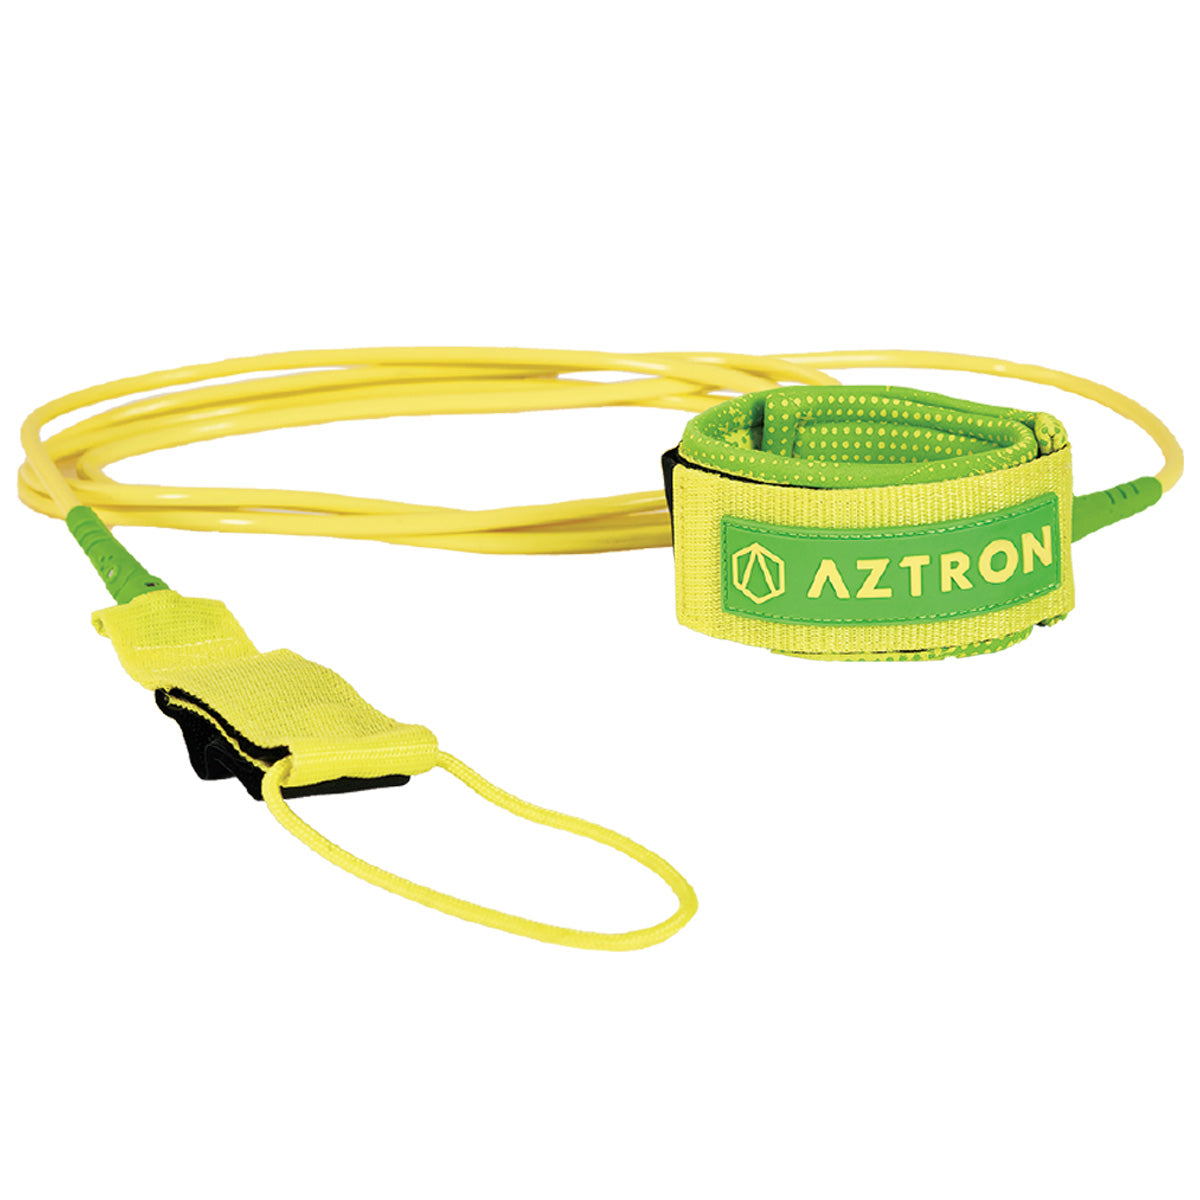 Aztron Orion - SUP